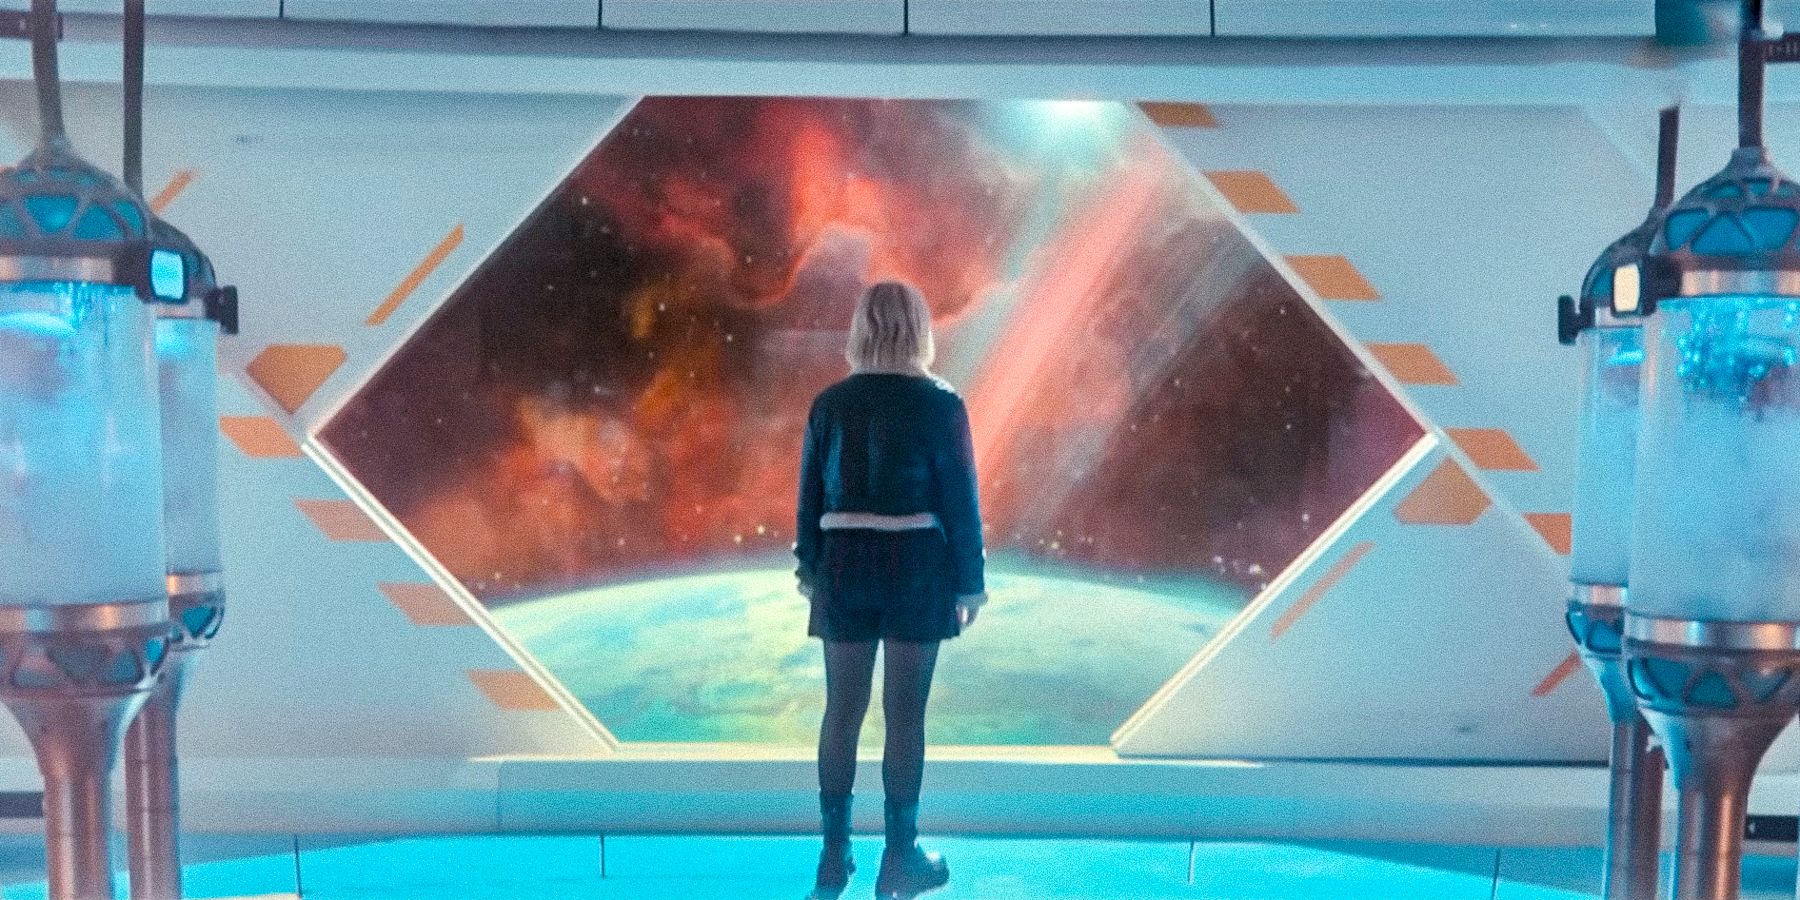 Ruby watching the universe from a window of the TARDIS in Doctor Who season 14